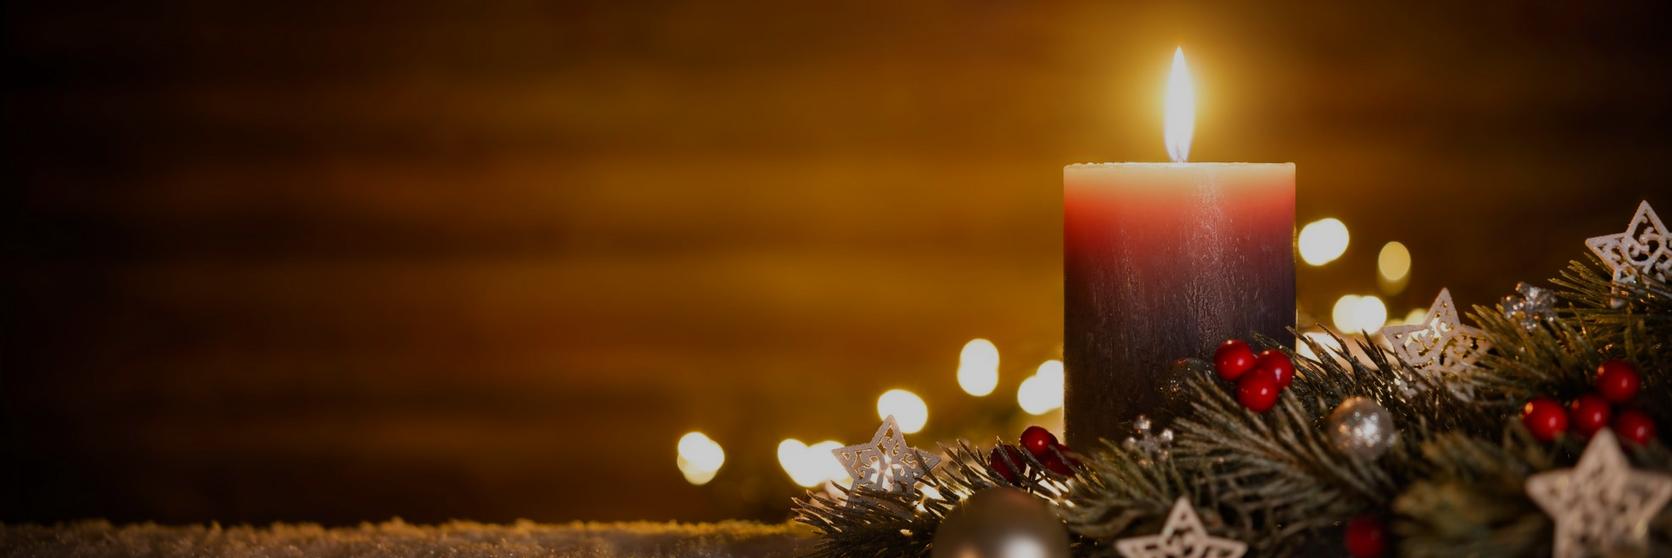 festive_red_candle